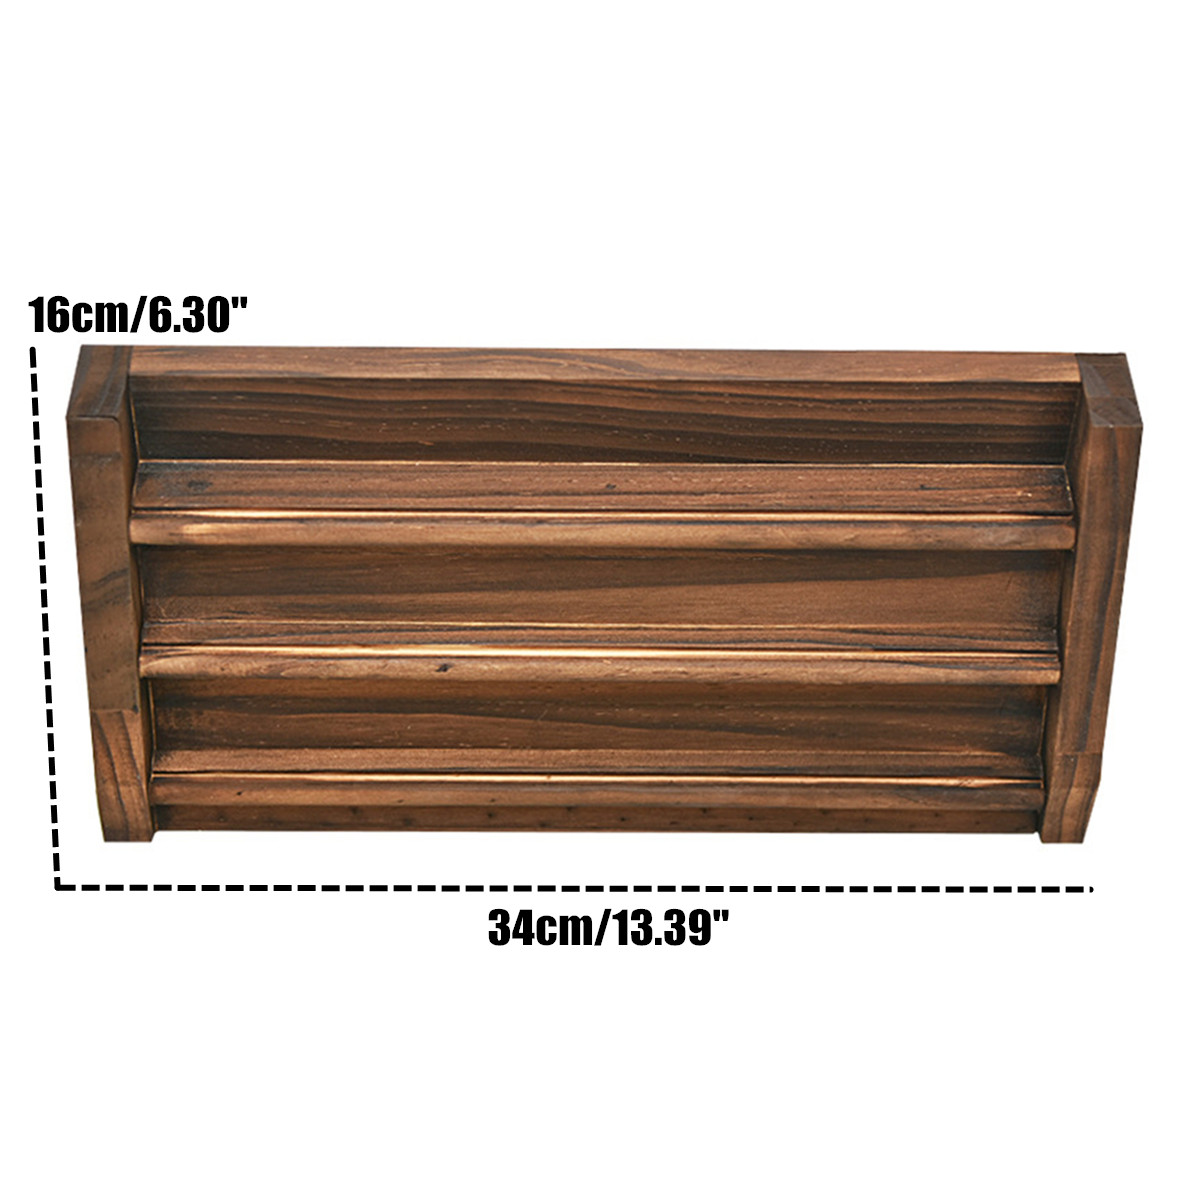 Wooden-Challenge-Collectible-Coin-Holder-Display-Rack-Stand-Case-Shelf-Decorations-1565457